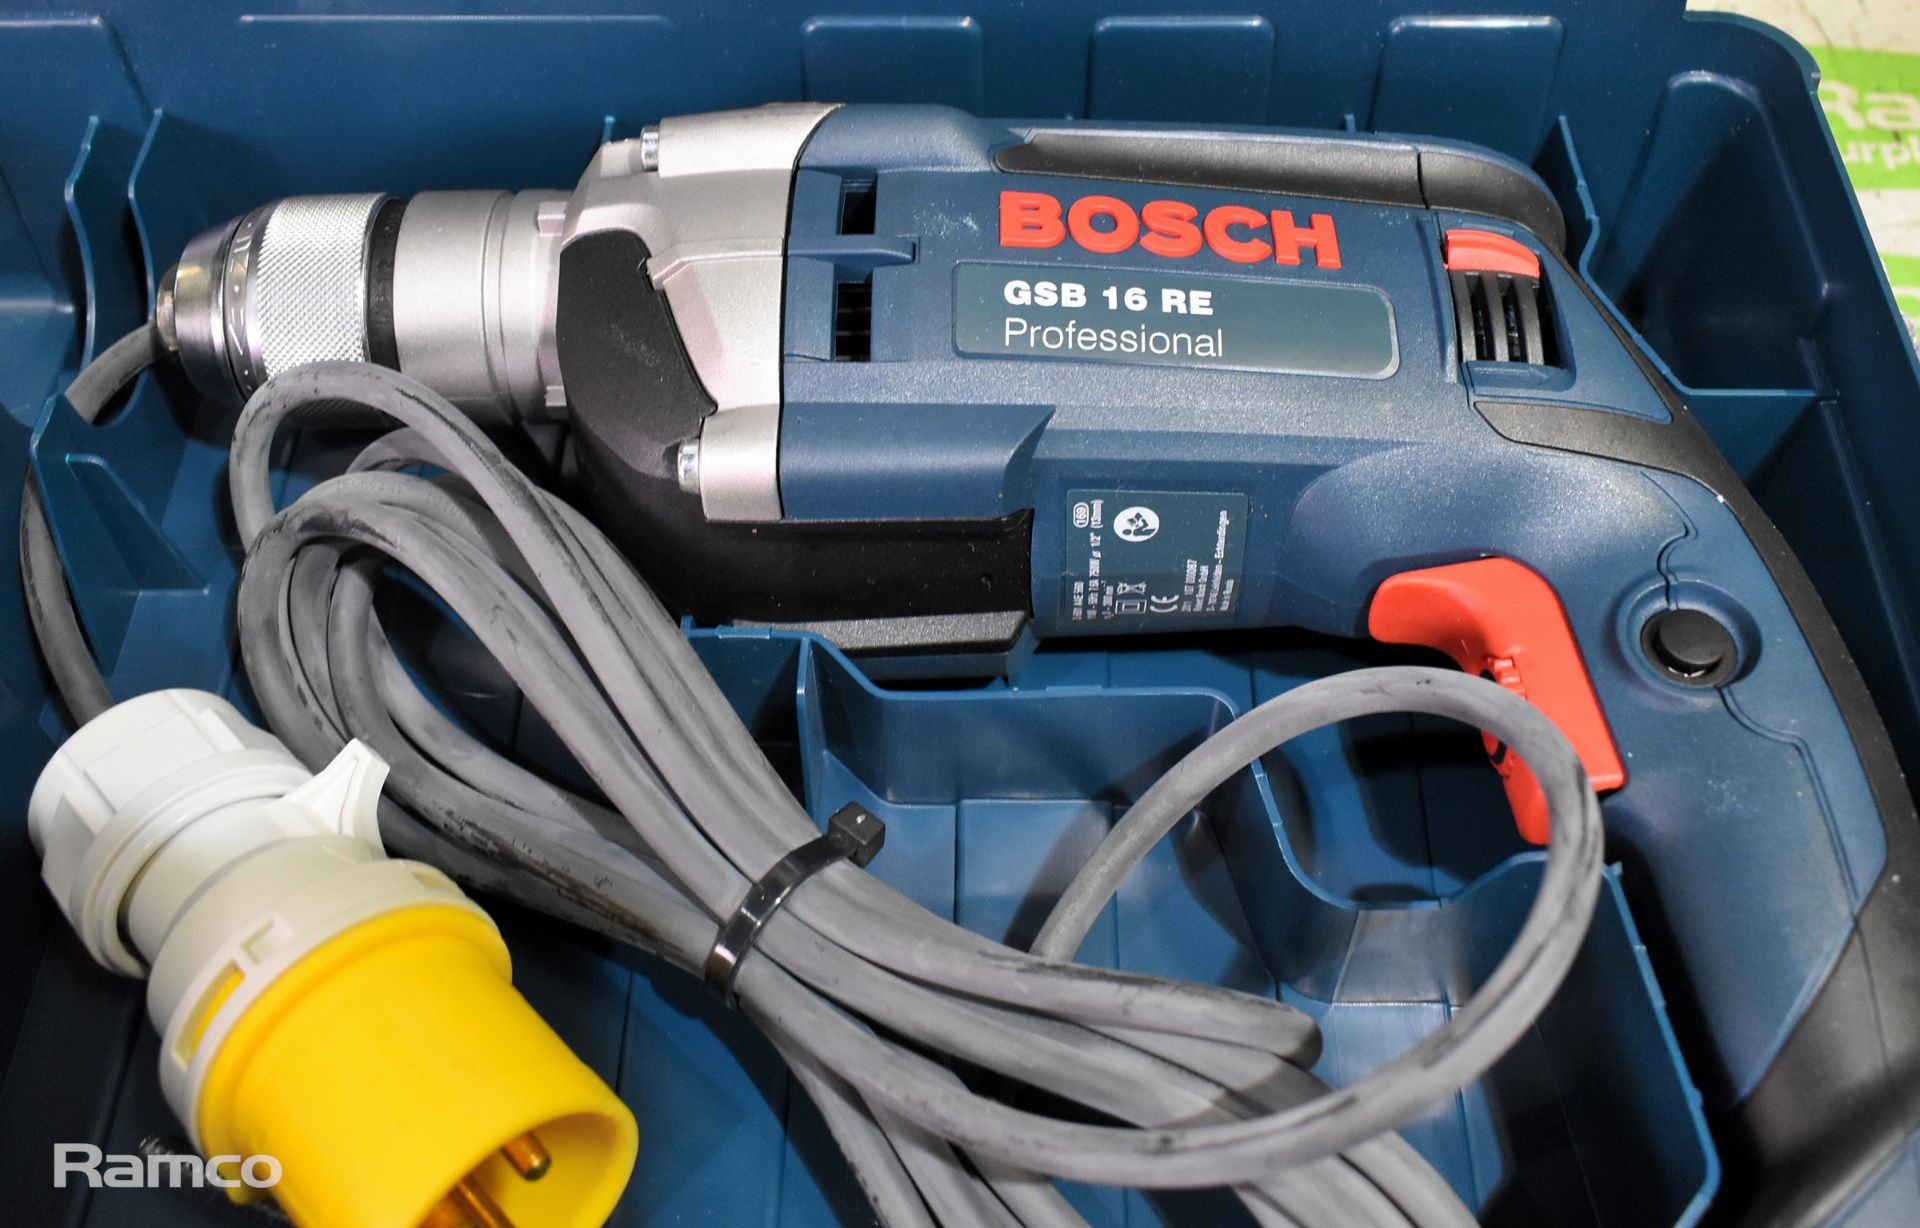 Bosch GSB 16 RE 110V electric drill with storage case - Image 3 of 6